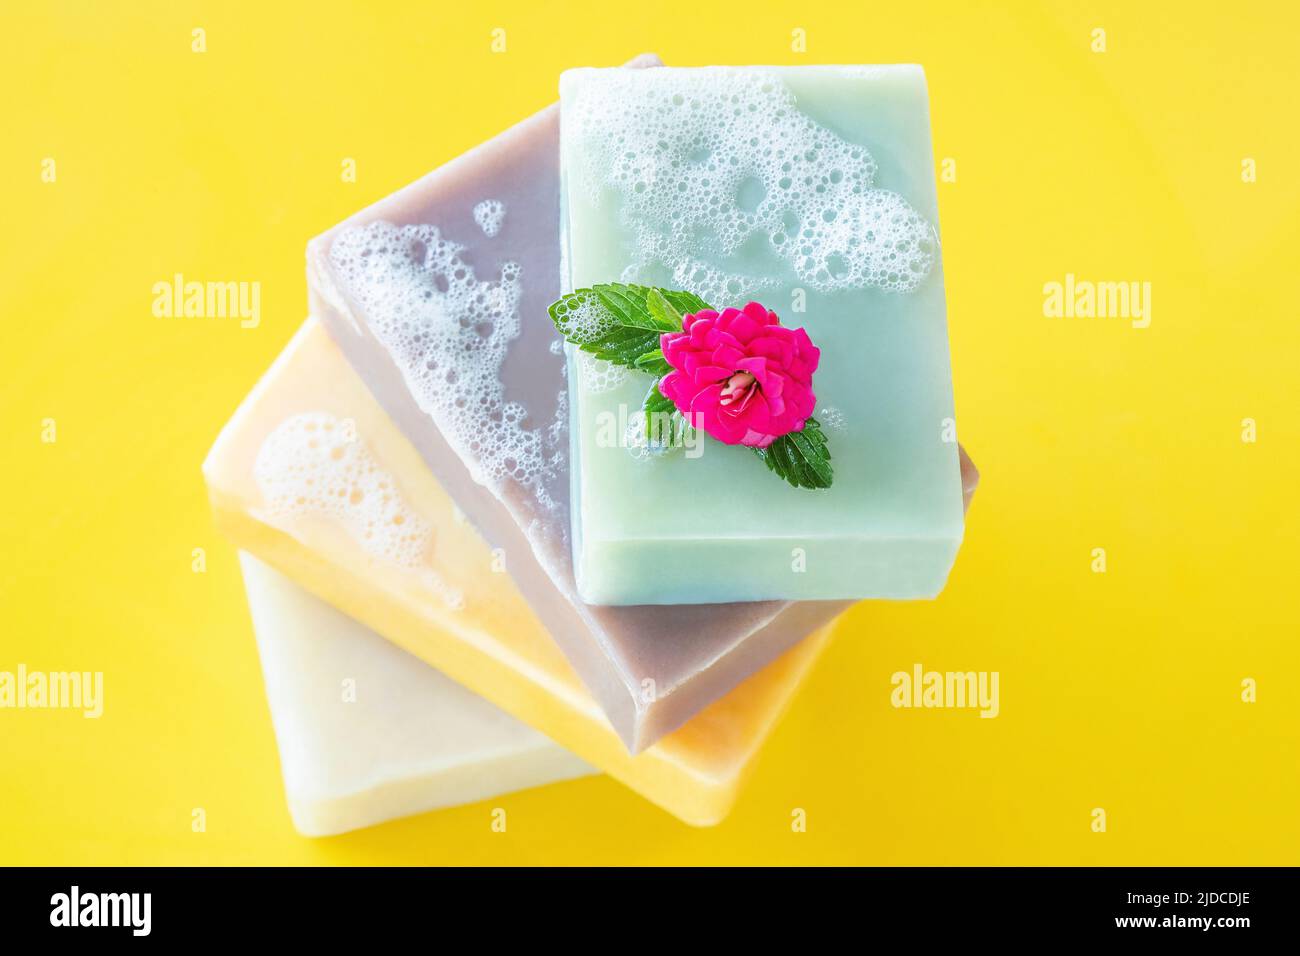 A stack of various soap bars Stock Photo